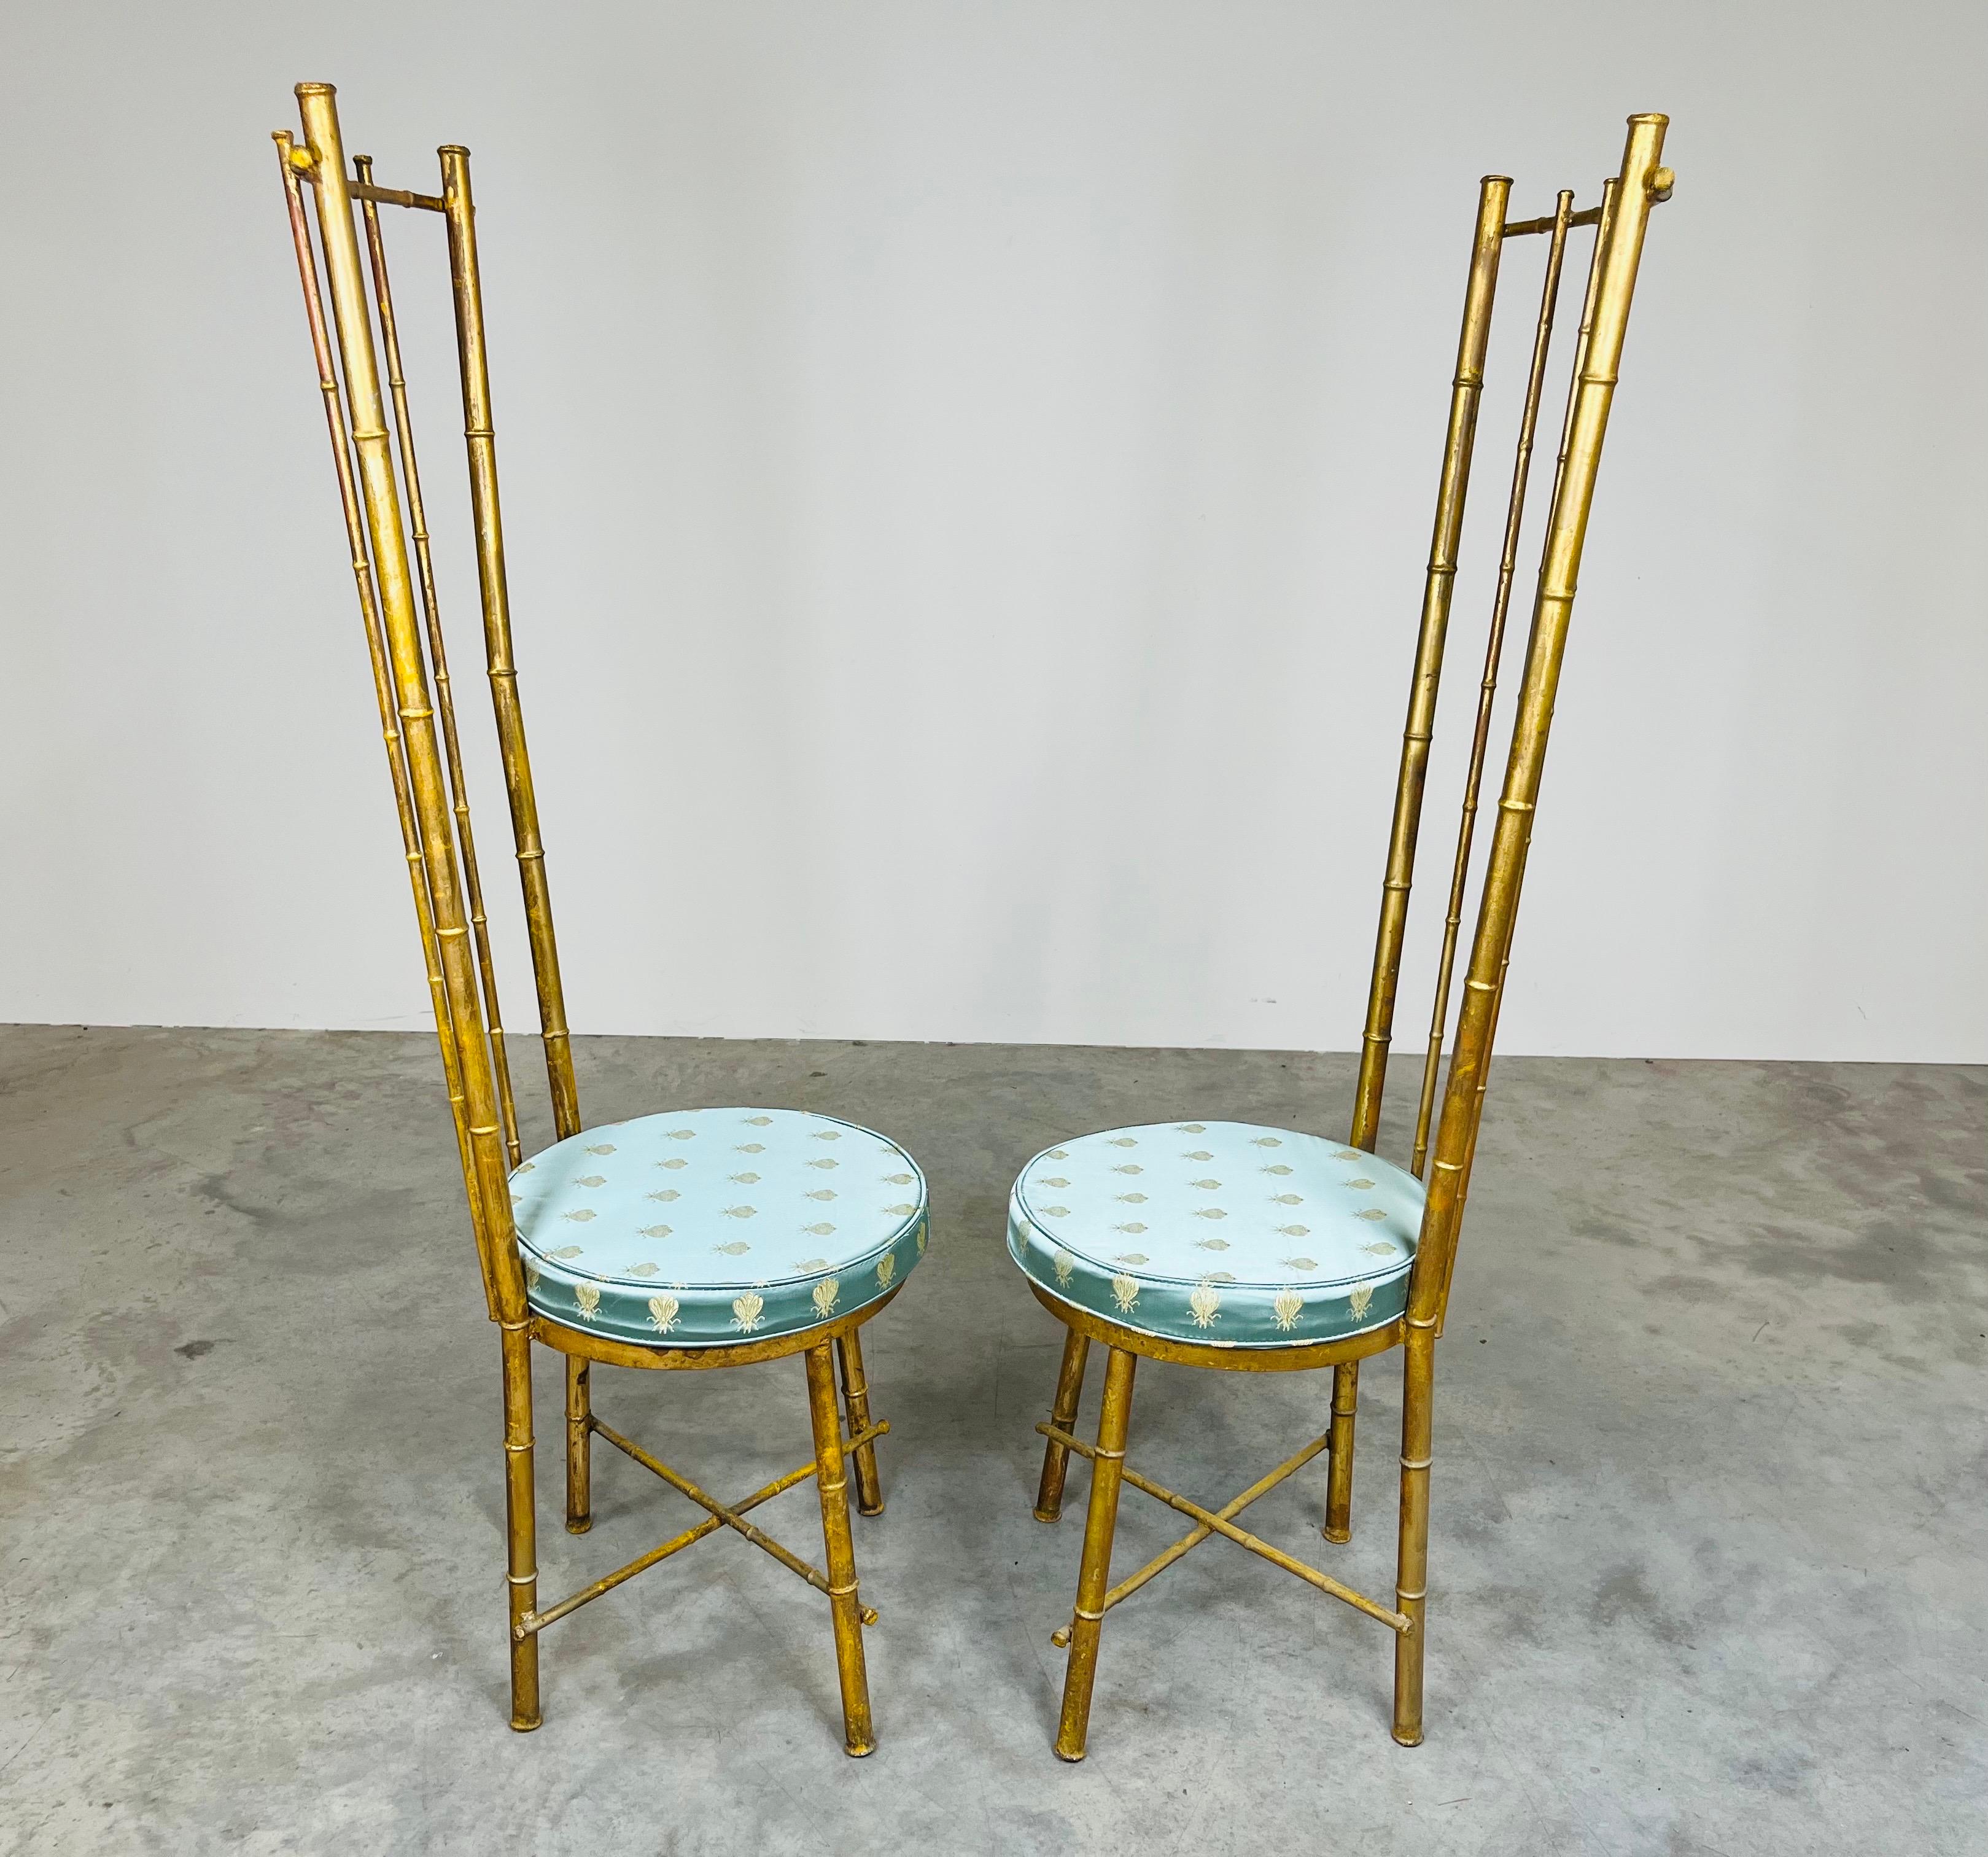 Vintage Pair Of Hollywood Regency Gold Gilt Metal Faux Bamboo High Back Chairs For Sale 2